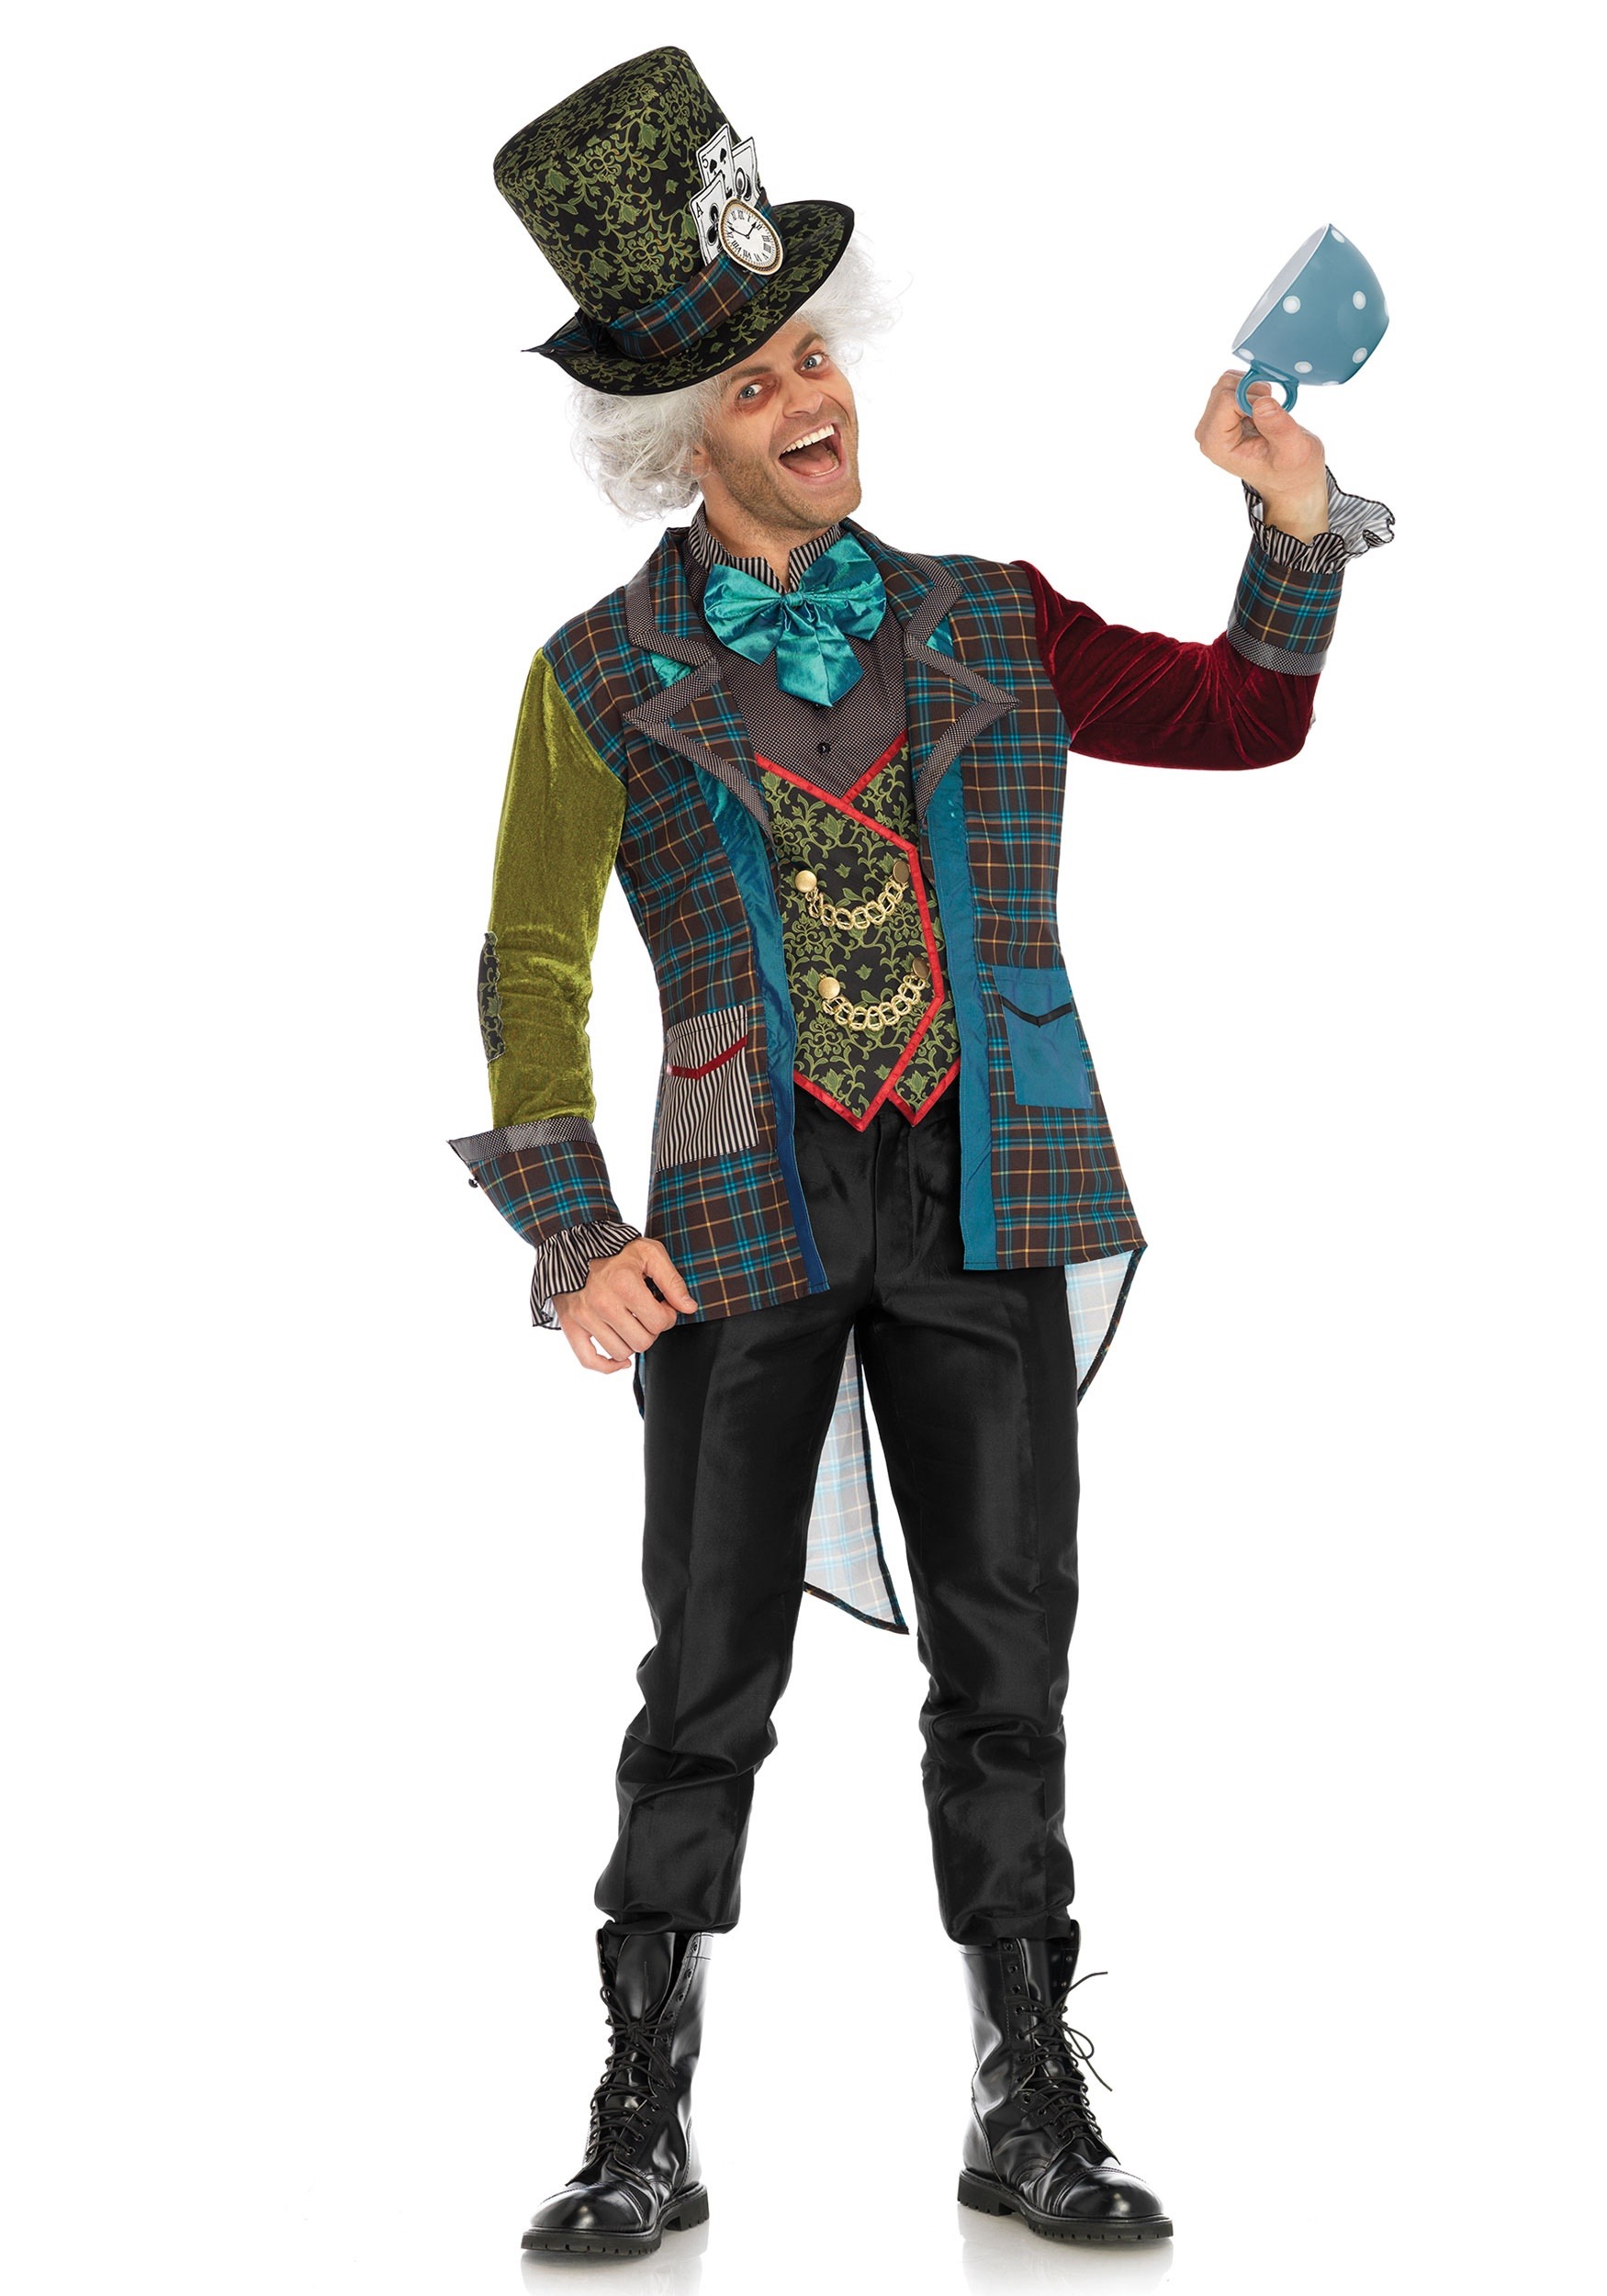 Image of Colorful Mad Hatter Costume for Men ID LE86691-L